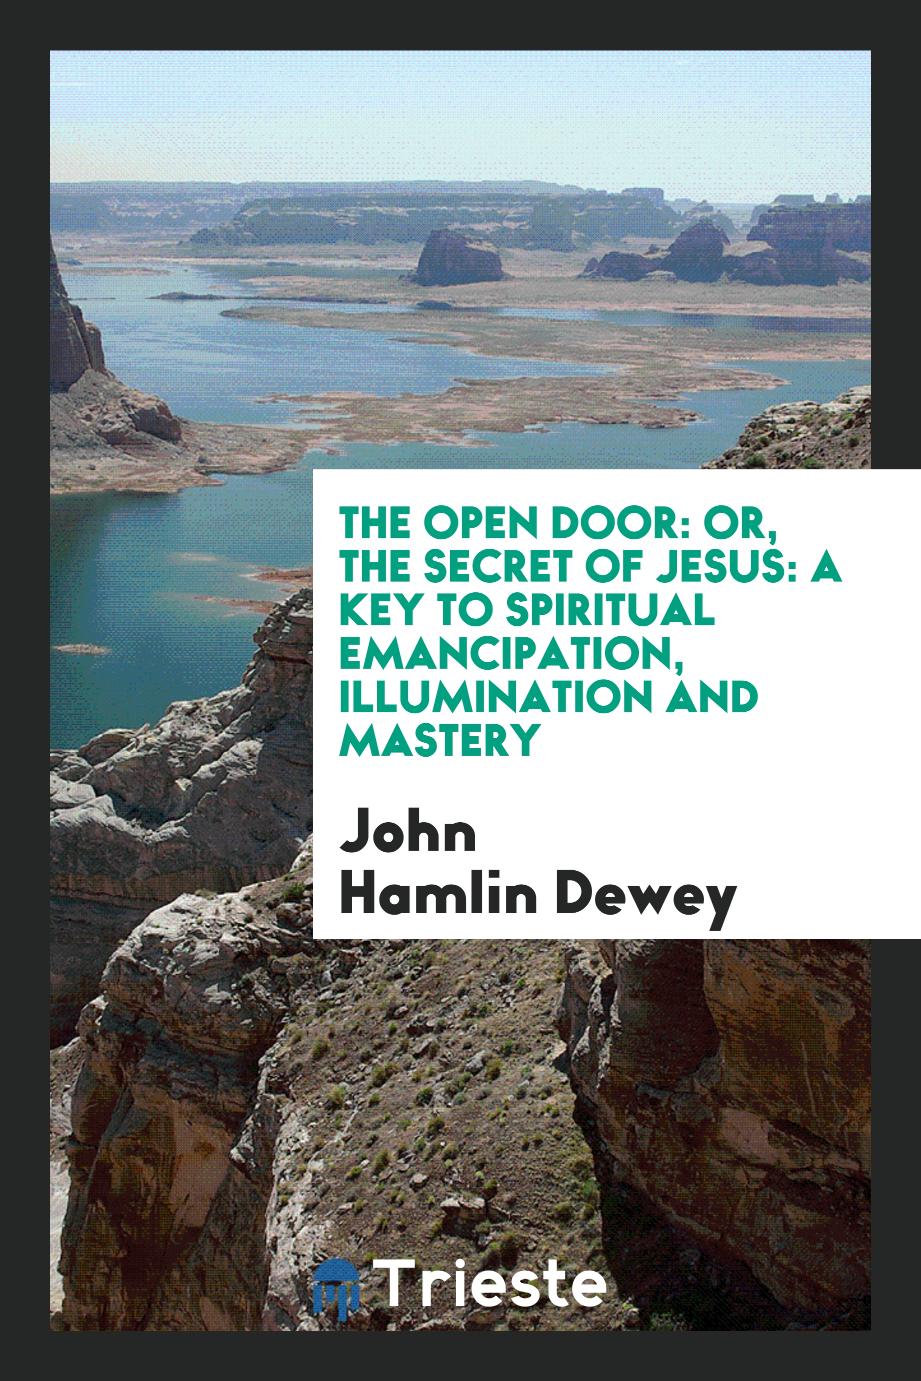 The Open Door: Or, the Secret of Jesus: A Key to Spiritual Emancipation, Illumination and Mastery